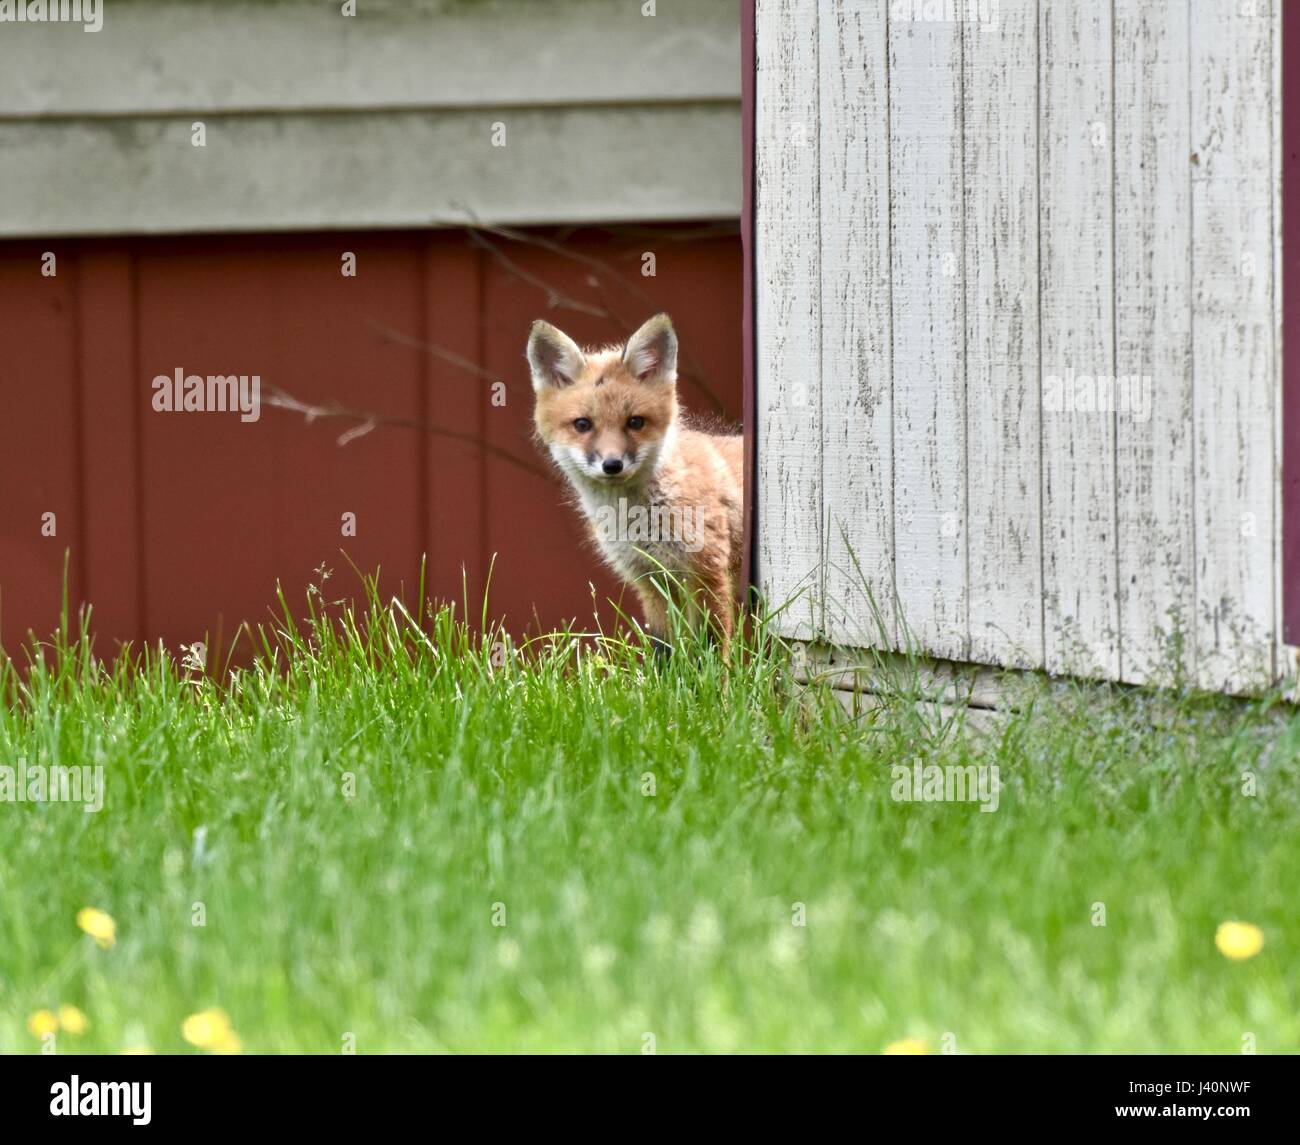 Red fox kit (Vulpes vulpes) exploring a farm on a warm spring day. Stock Photo